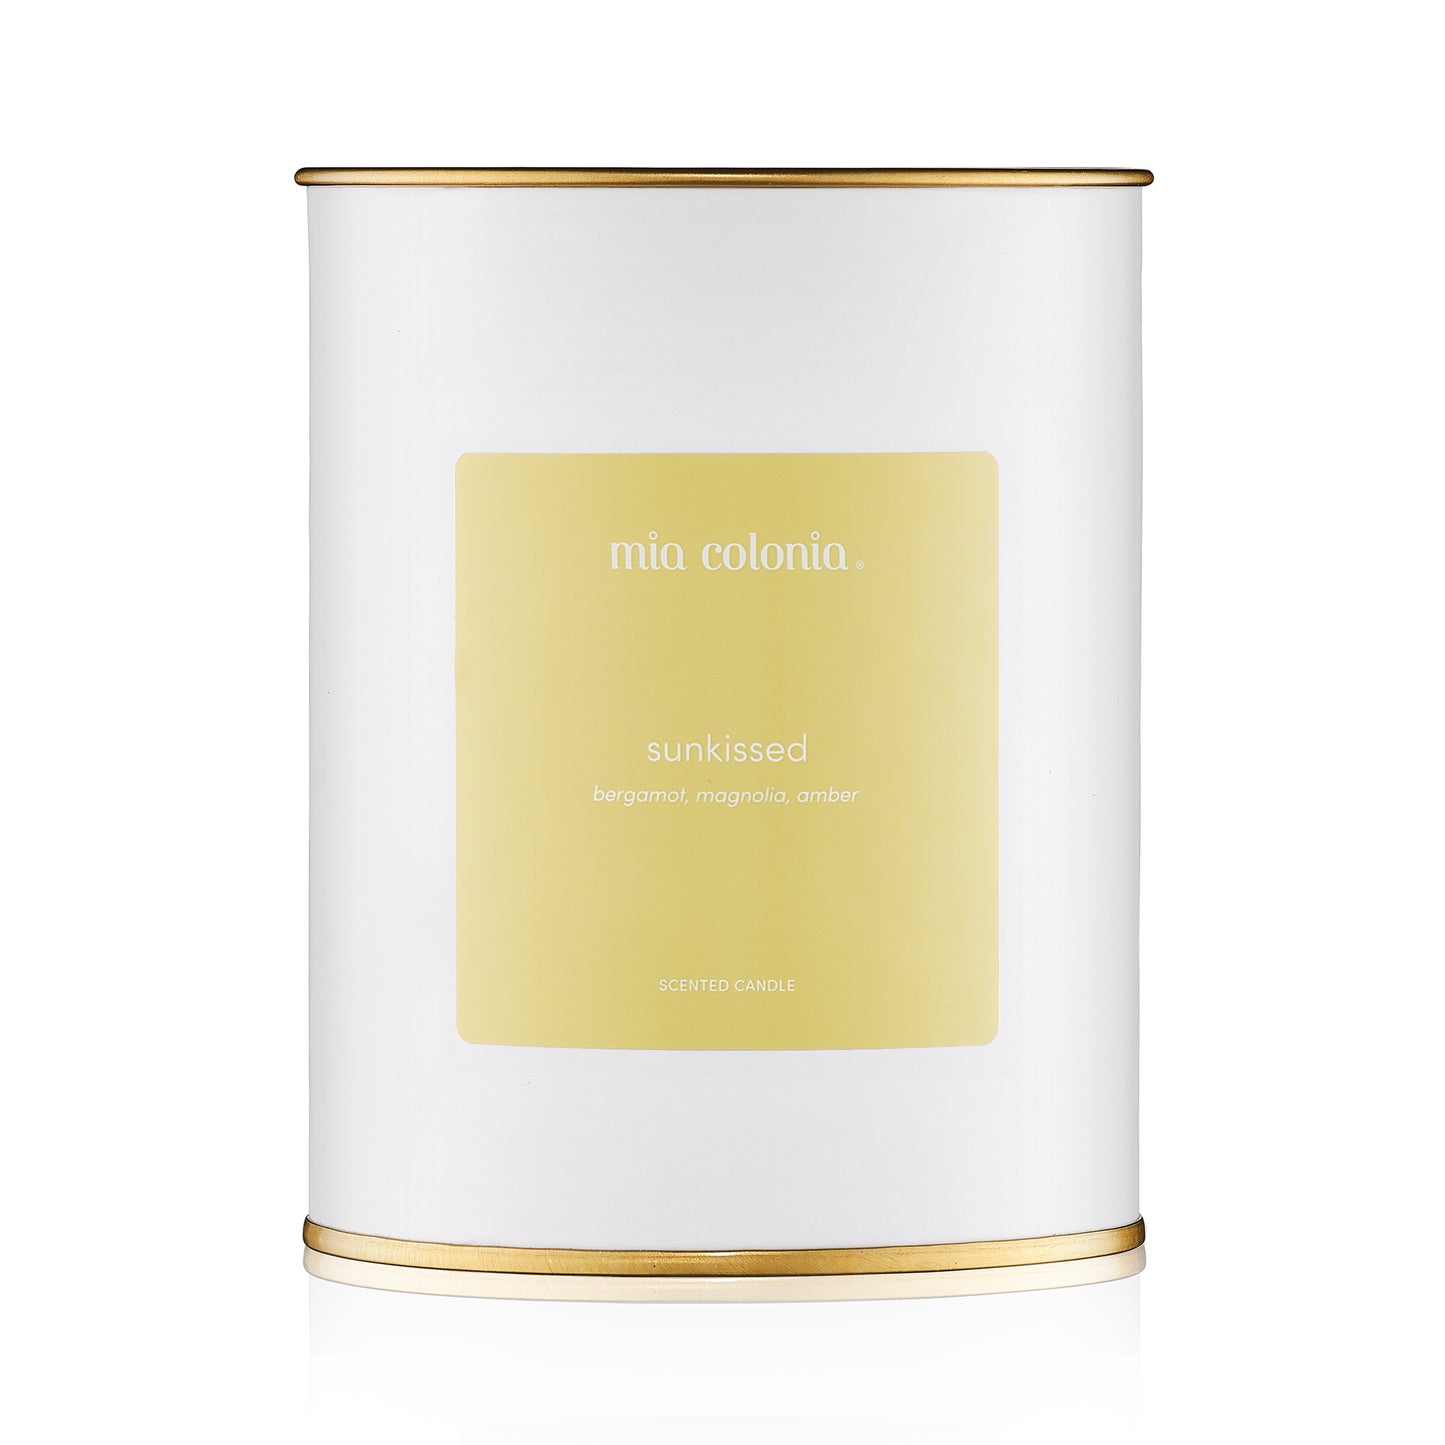 “Sunkissed” Armonica scented candles 100% natural rapeseed wax 250g